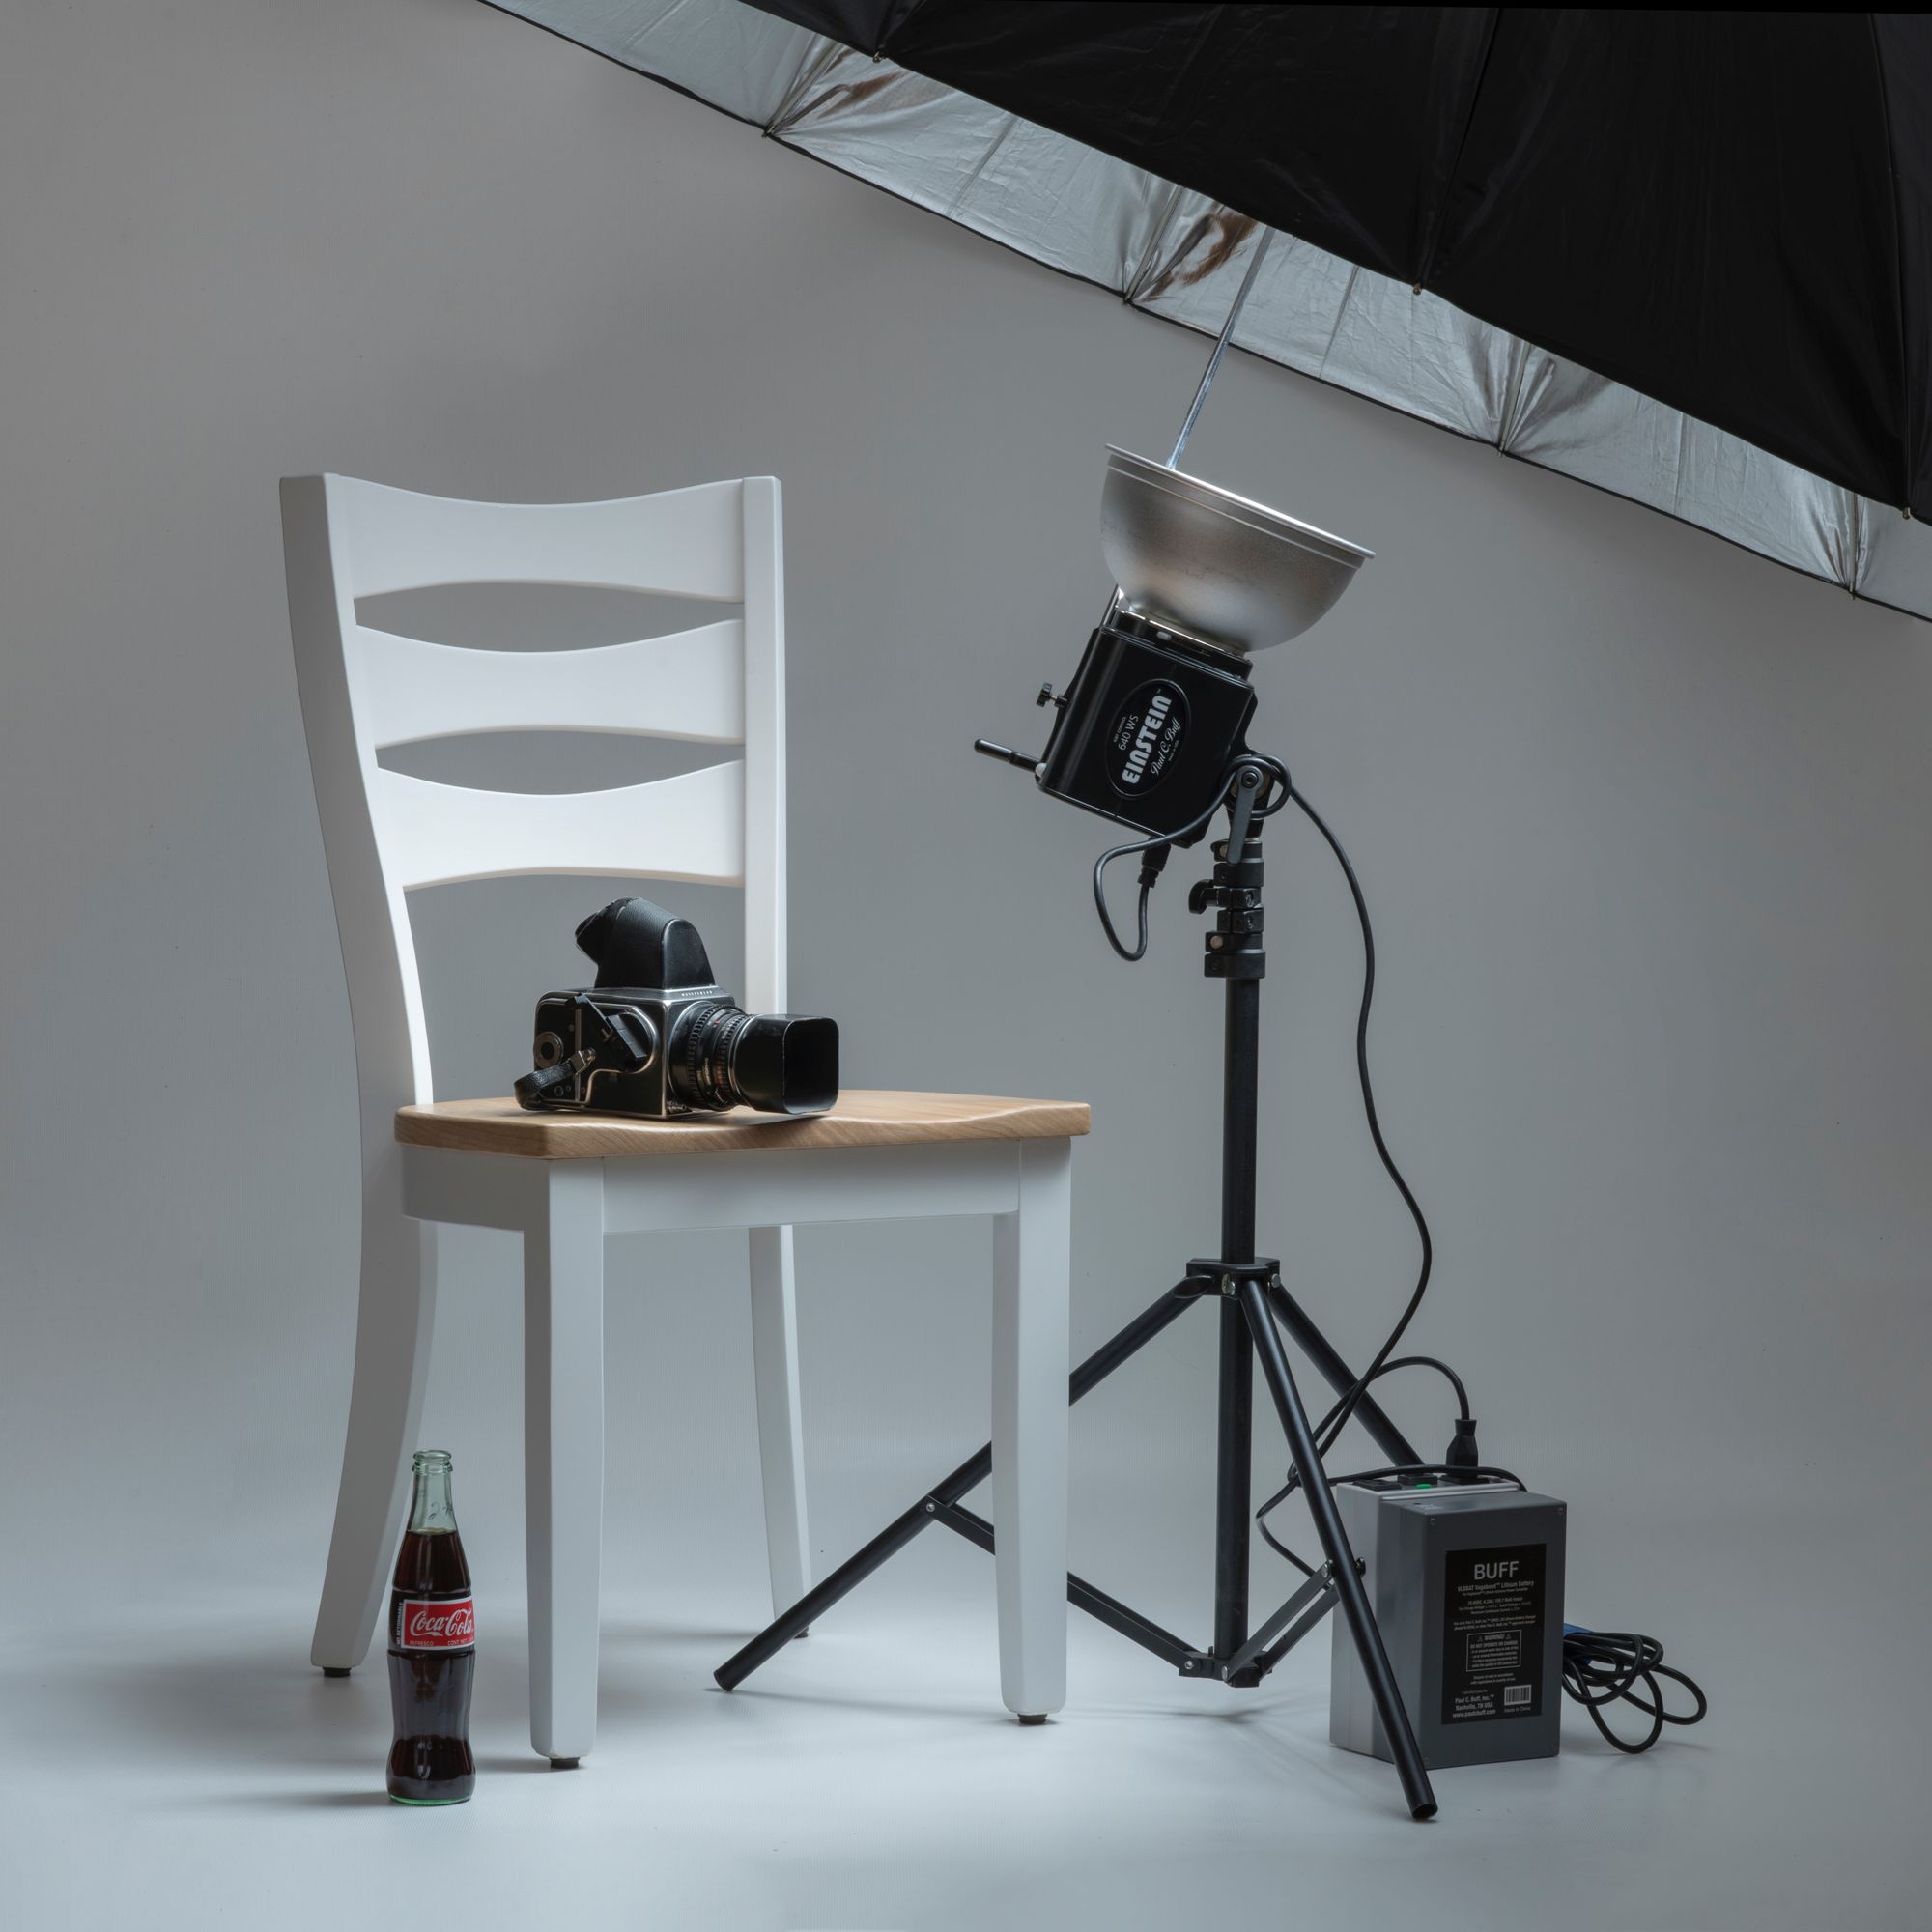 Get Started with Studio Photography